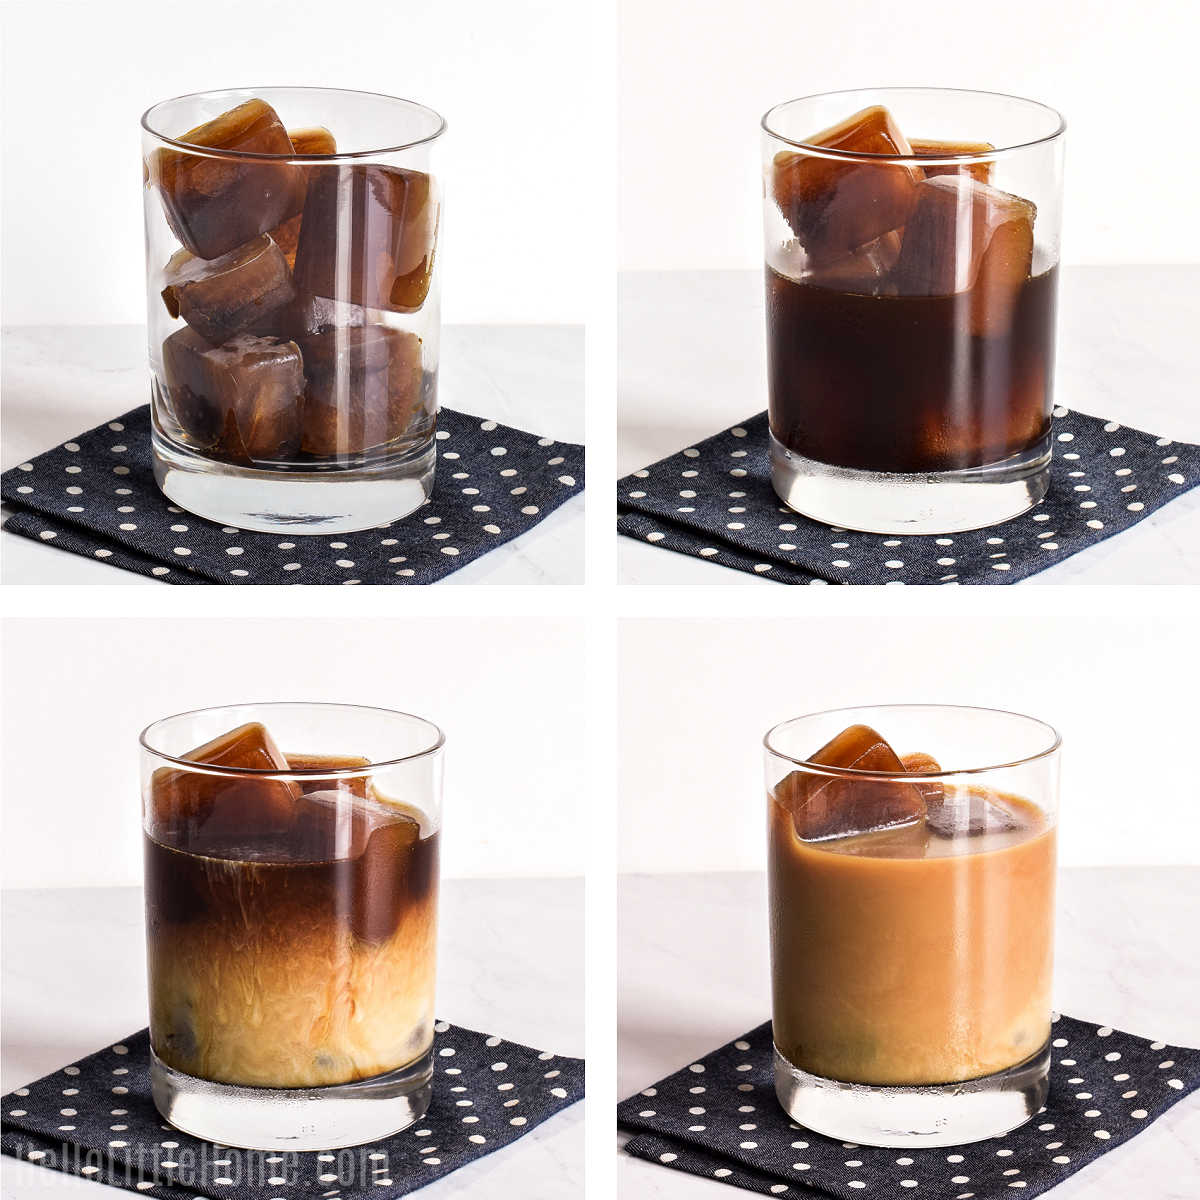 A photo collage showing how to use the frozen coffee cubes.